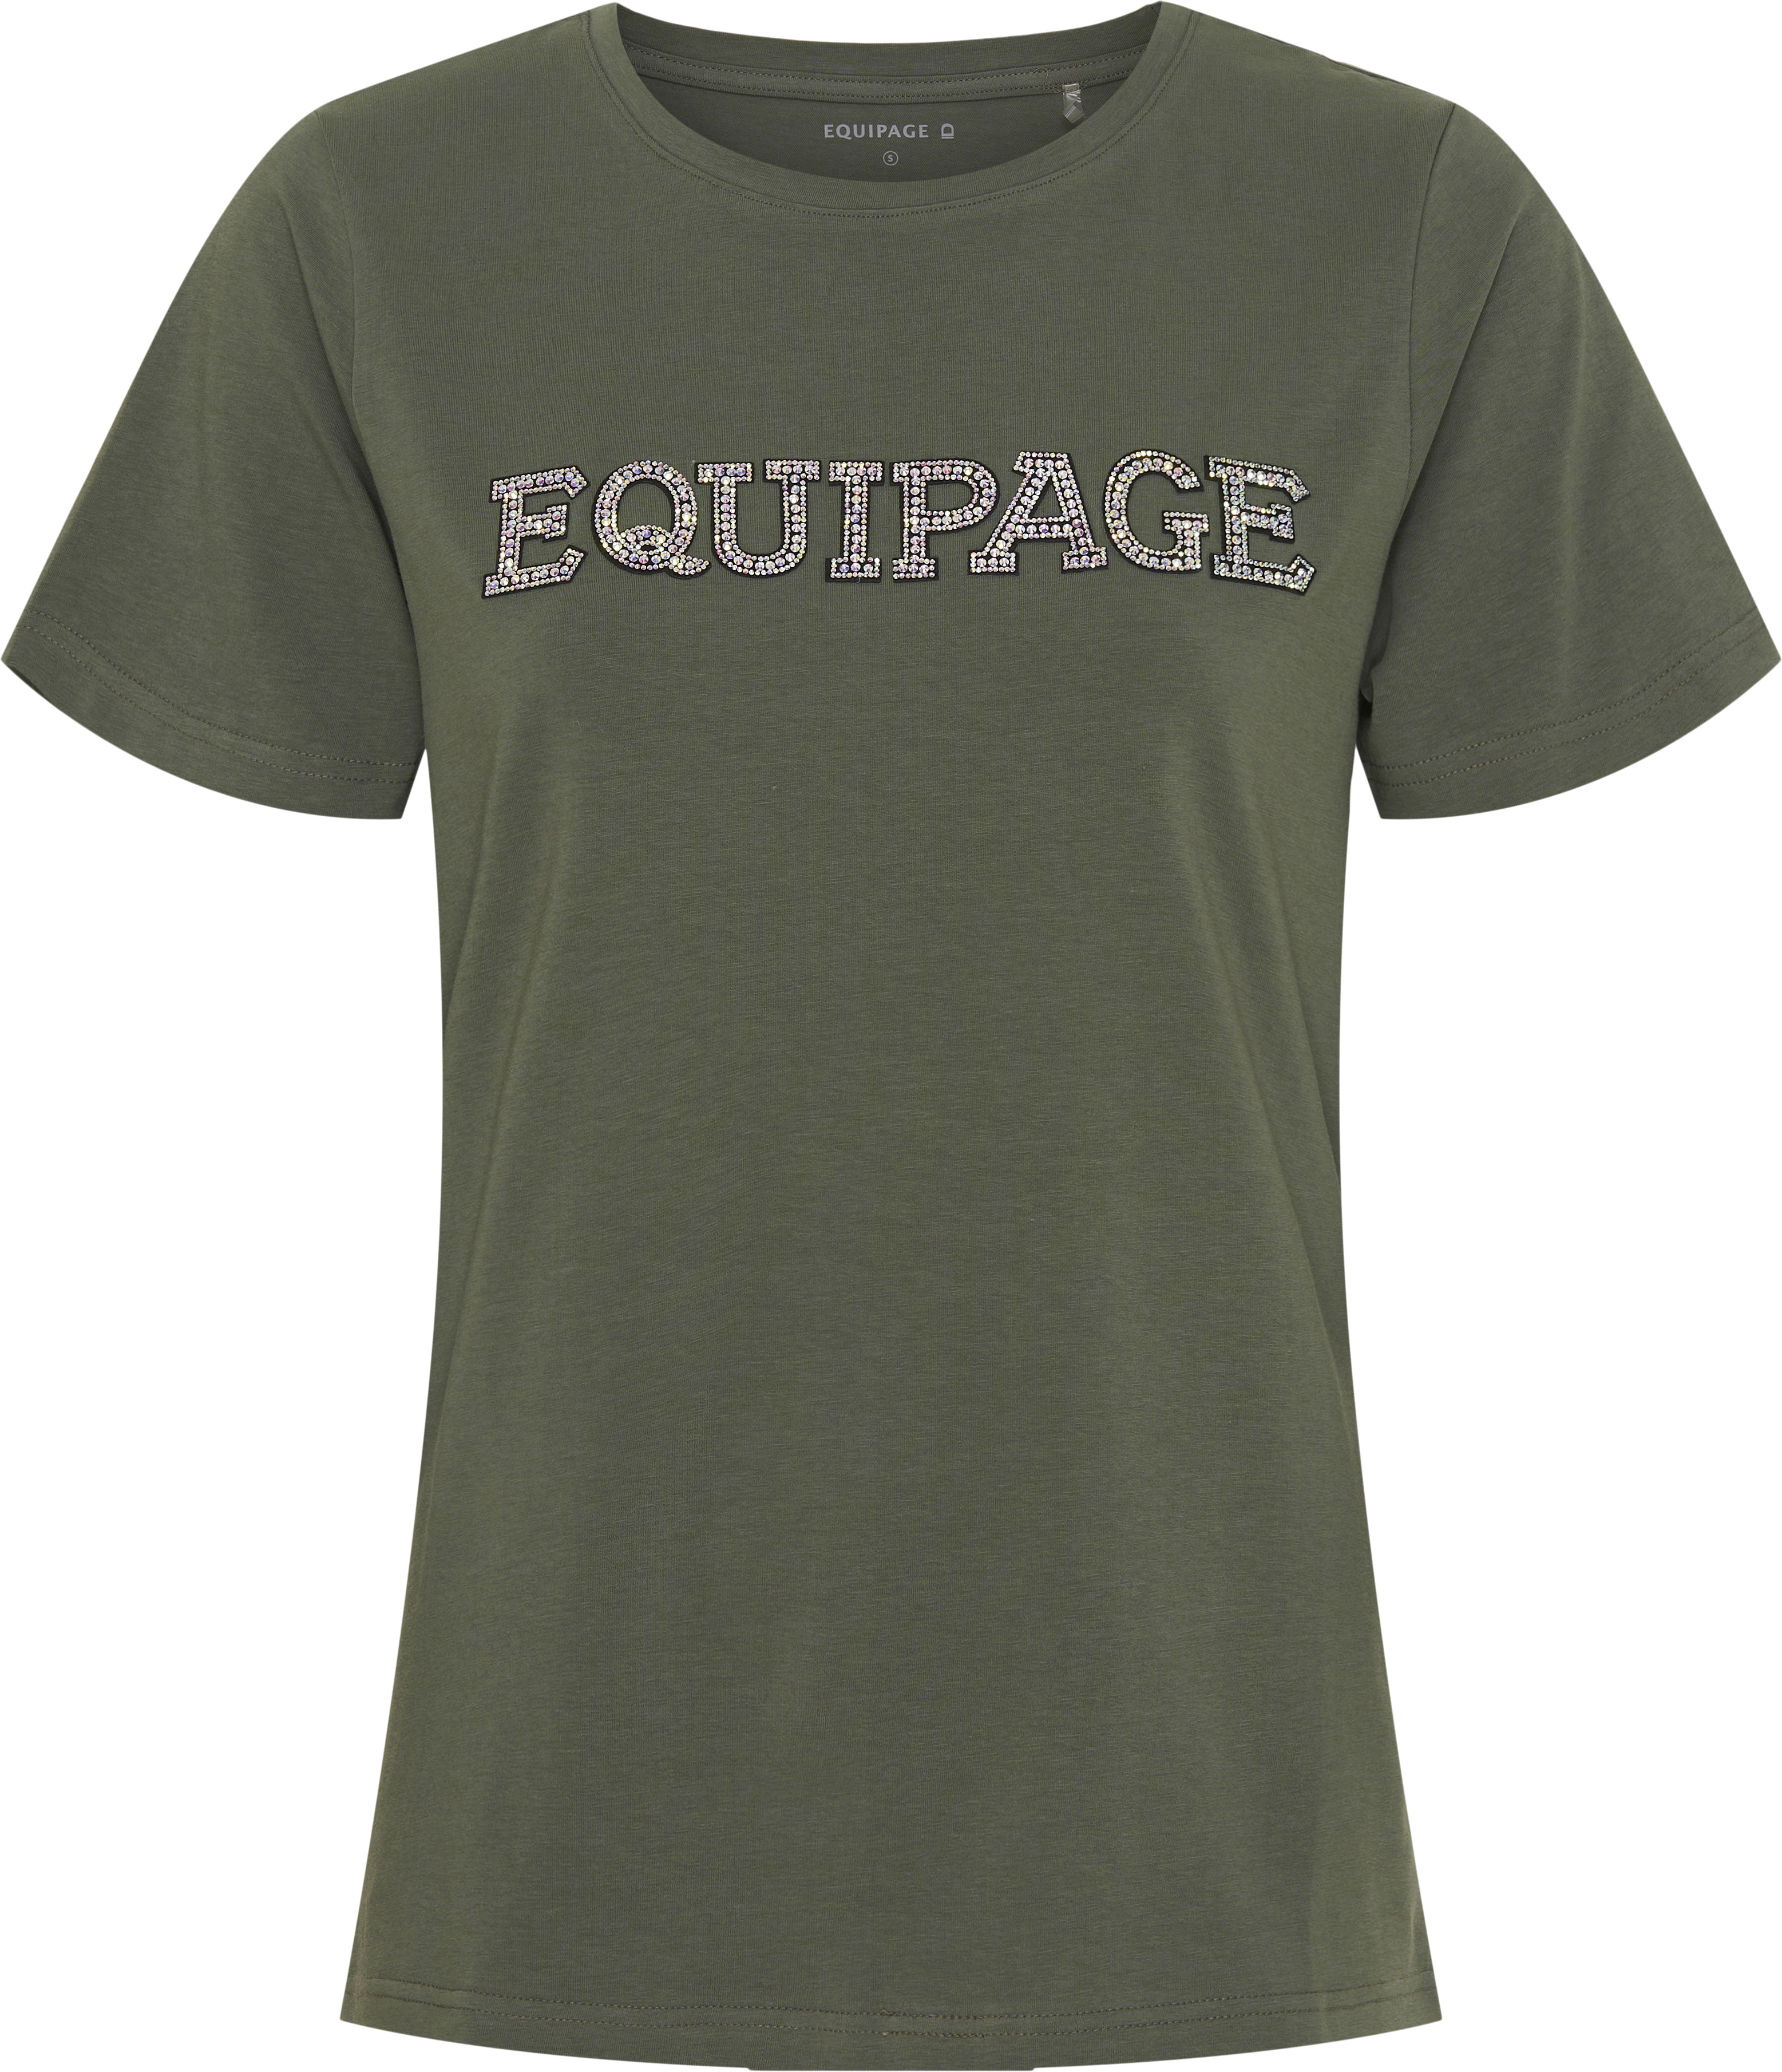 Equipage Melina T-Shirt - Forest (XL)